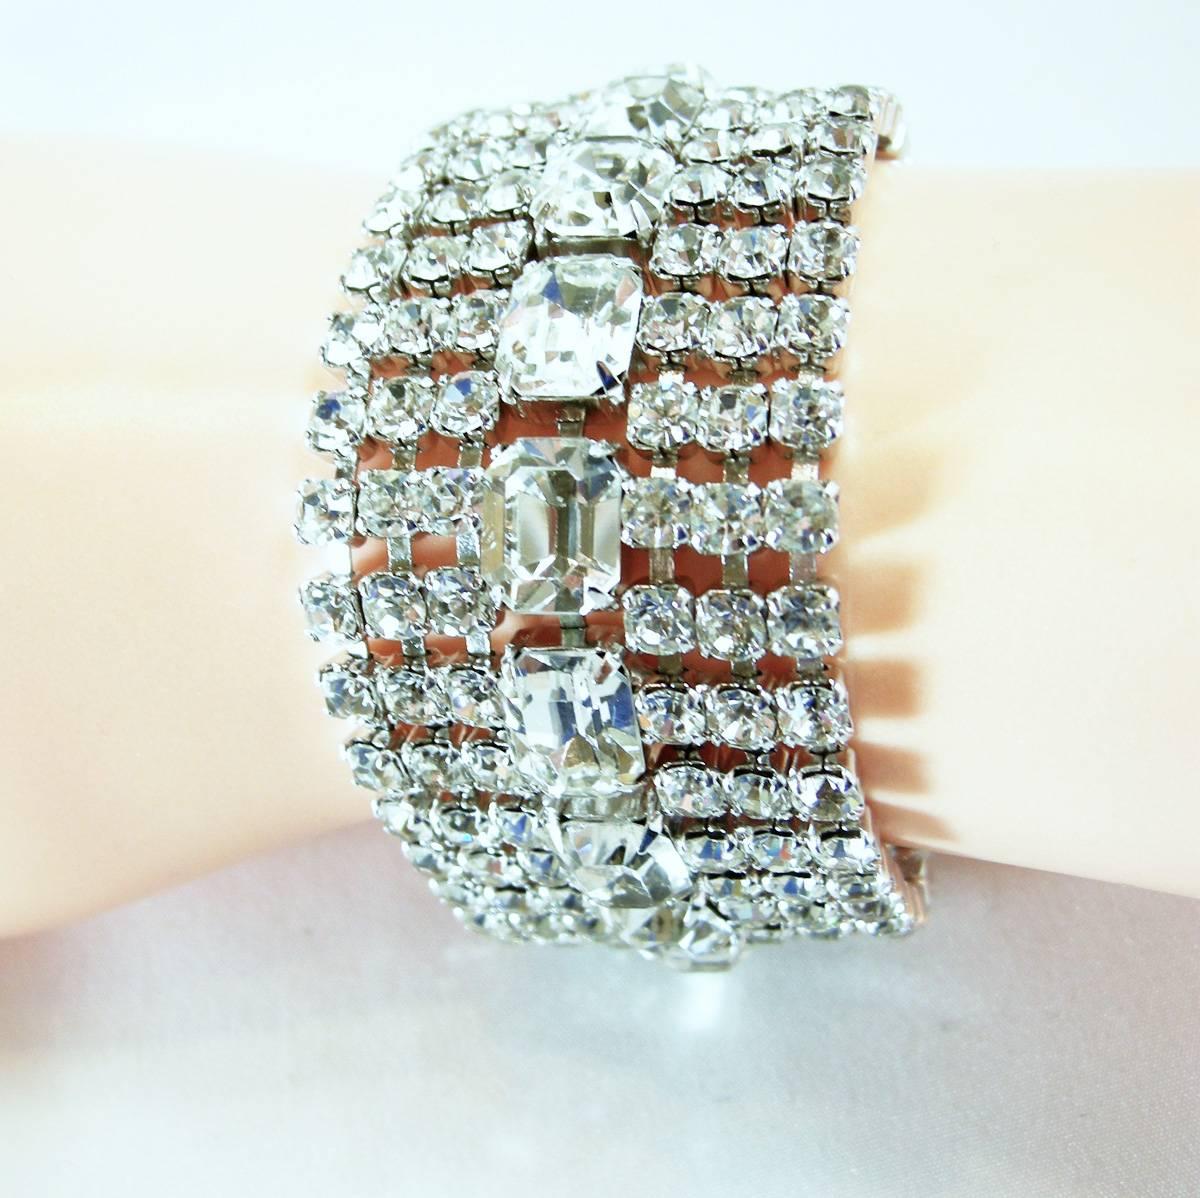 This striking signed Weiss bracelet features faceted clear rhinestones in a silver-tone metal setting. This bracelet measures 7” x 1-1/2” with a slide-in clasp and safety chain. It is signed “Weiss” and is in excellent condition.
